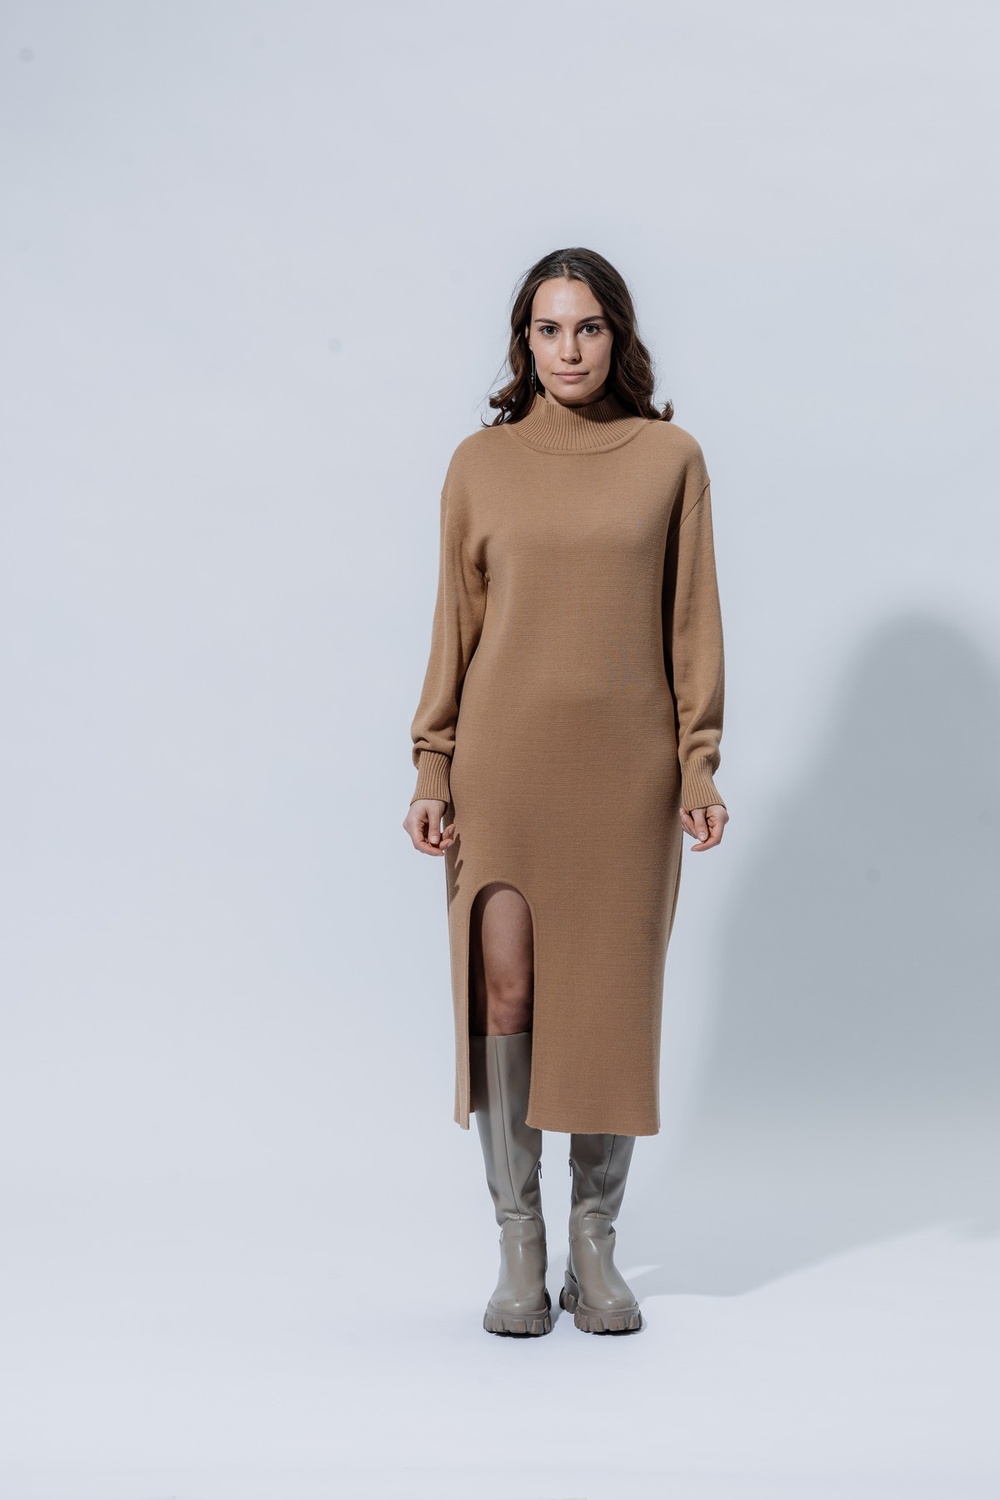 Dress knitted with a cutout merino wool